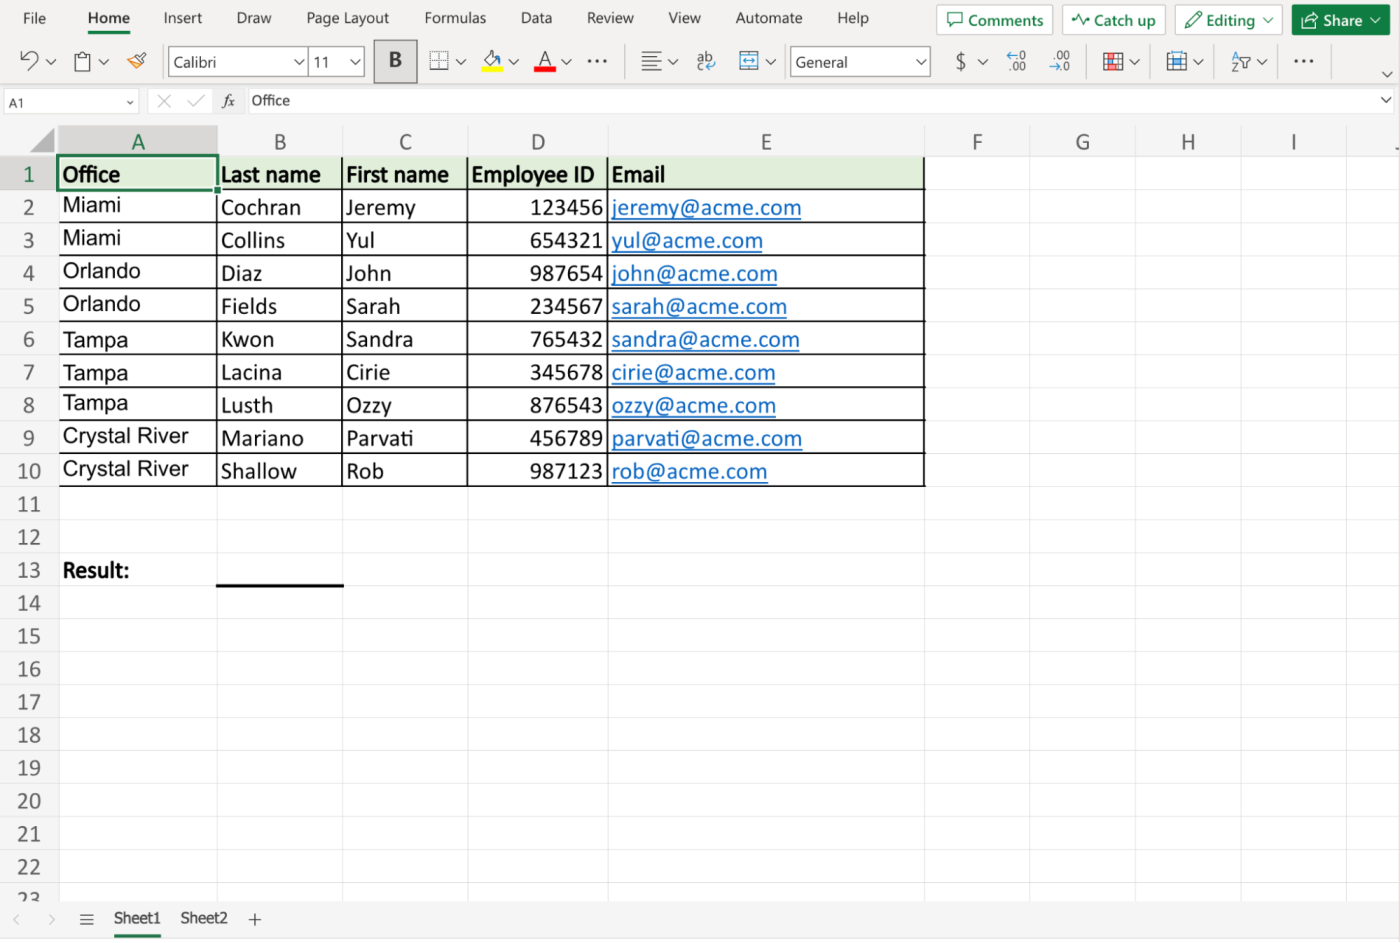 Demo Excel spreadsheet with employee names, IDs, and company email addresses. 